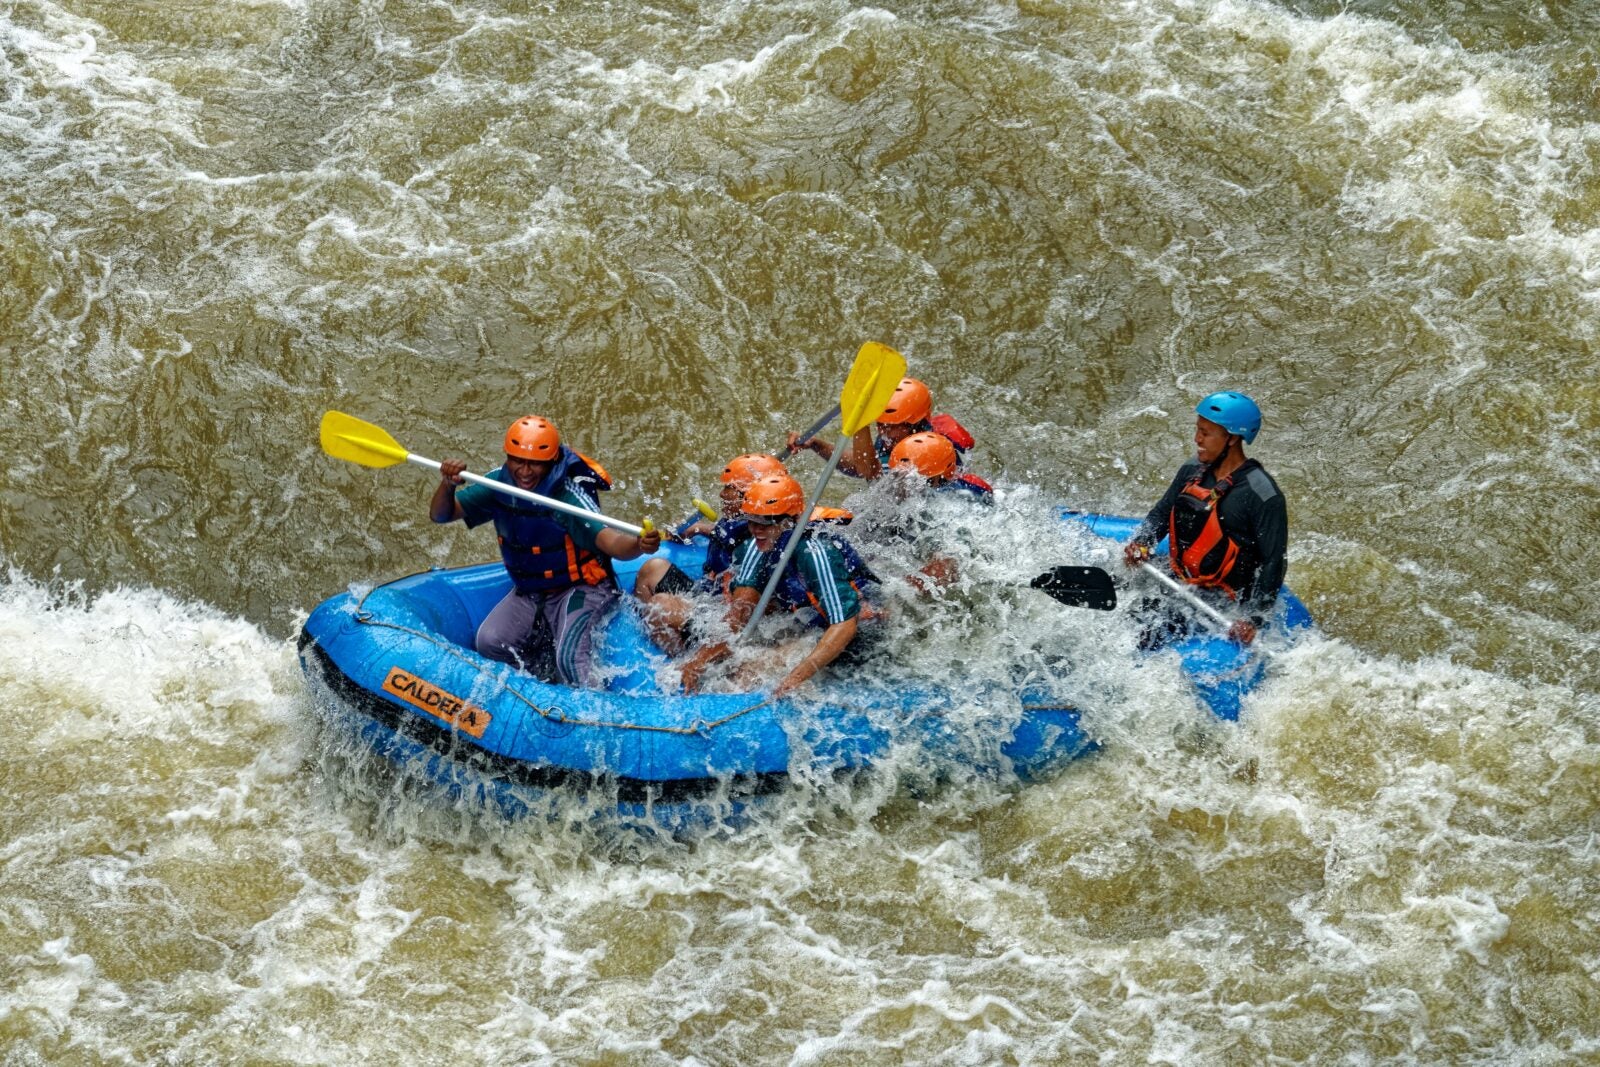 Four men wearing bright colored helmets in a blue raft paddling in rough waters